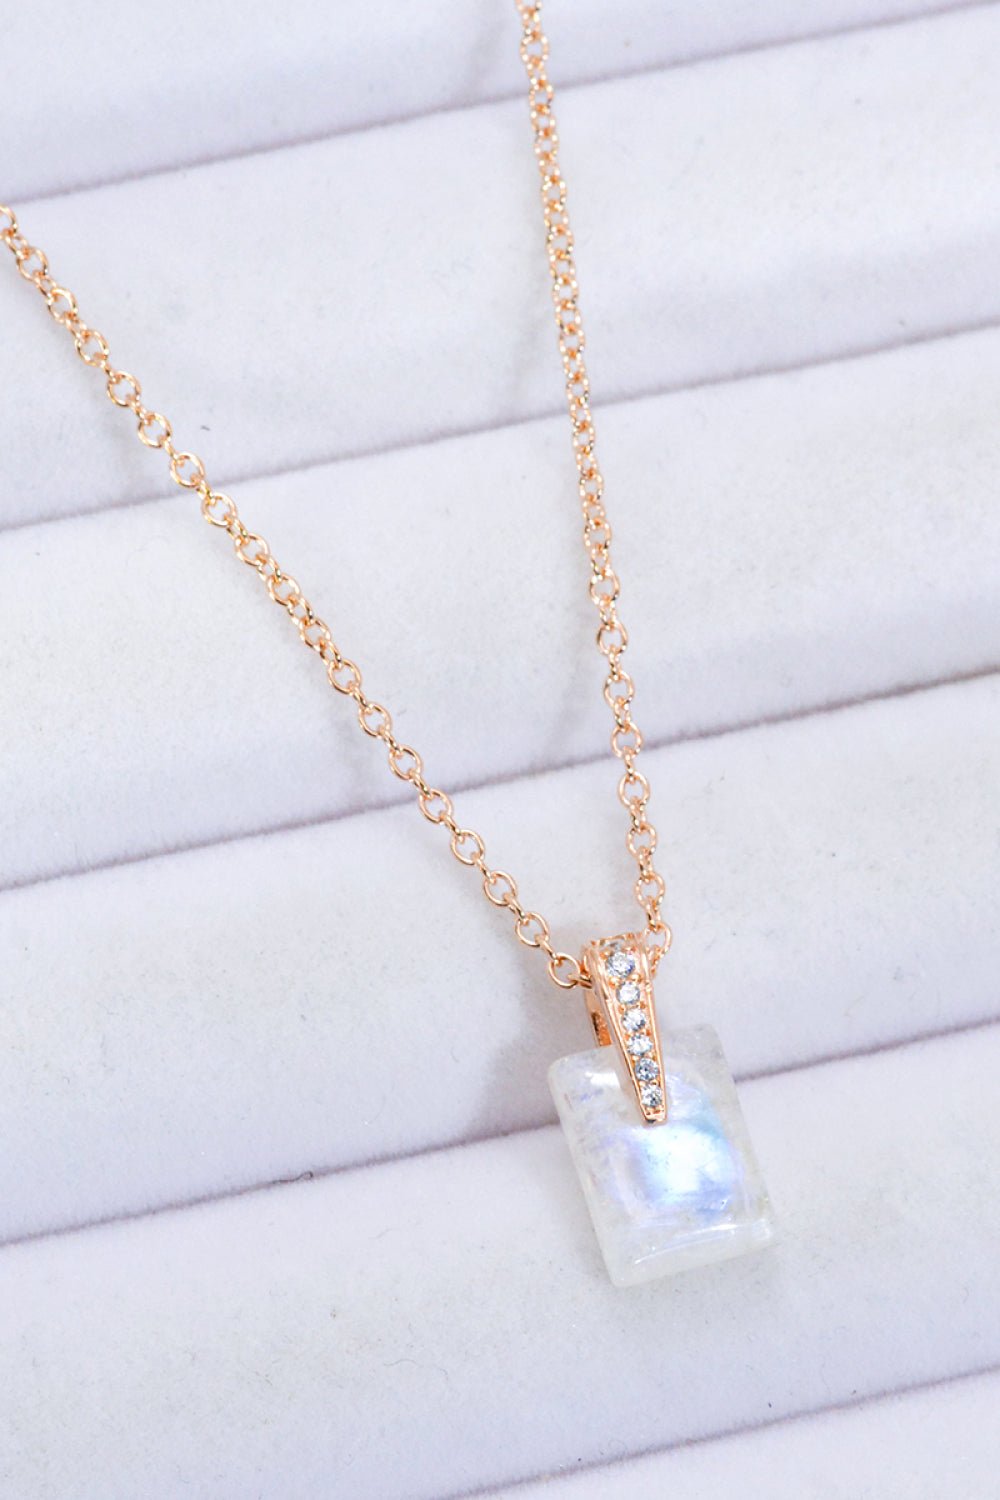 925 Sterling Silver Natural Moonstone Pendant Necklace - Shah S. Sahota